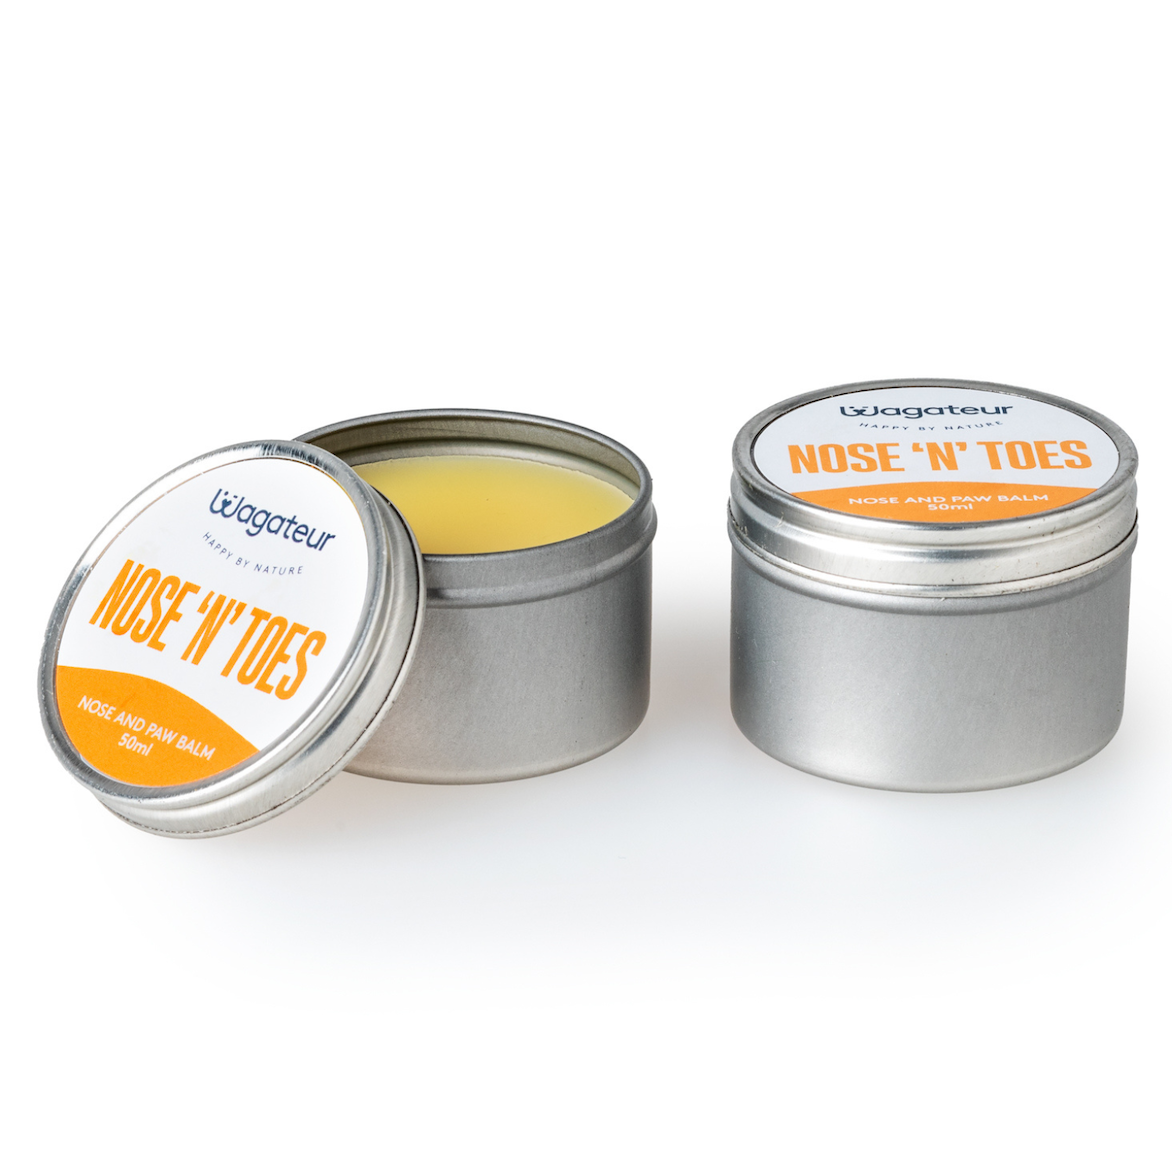 Nose 'N' Toes - Nose and Paw Balm